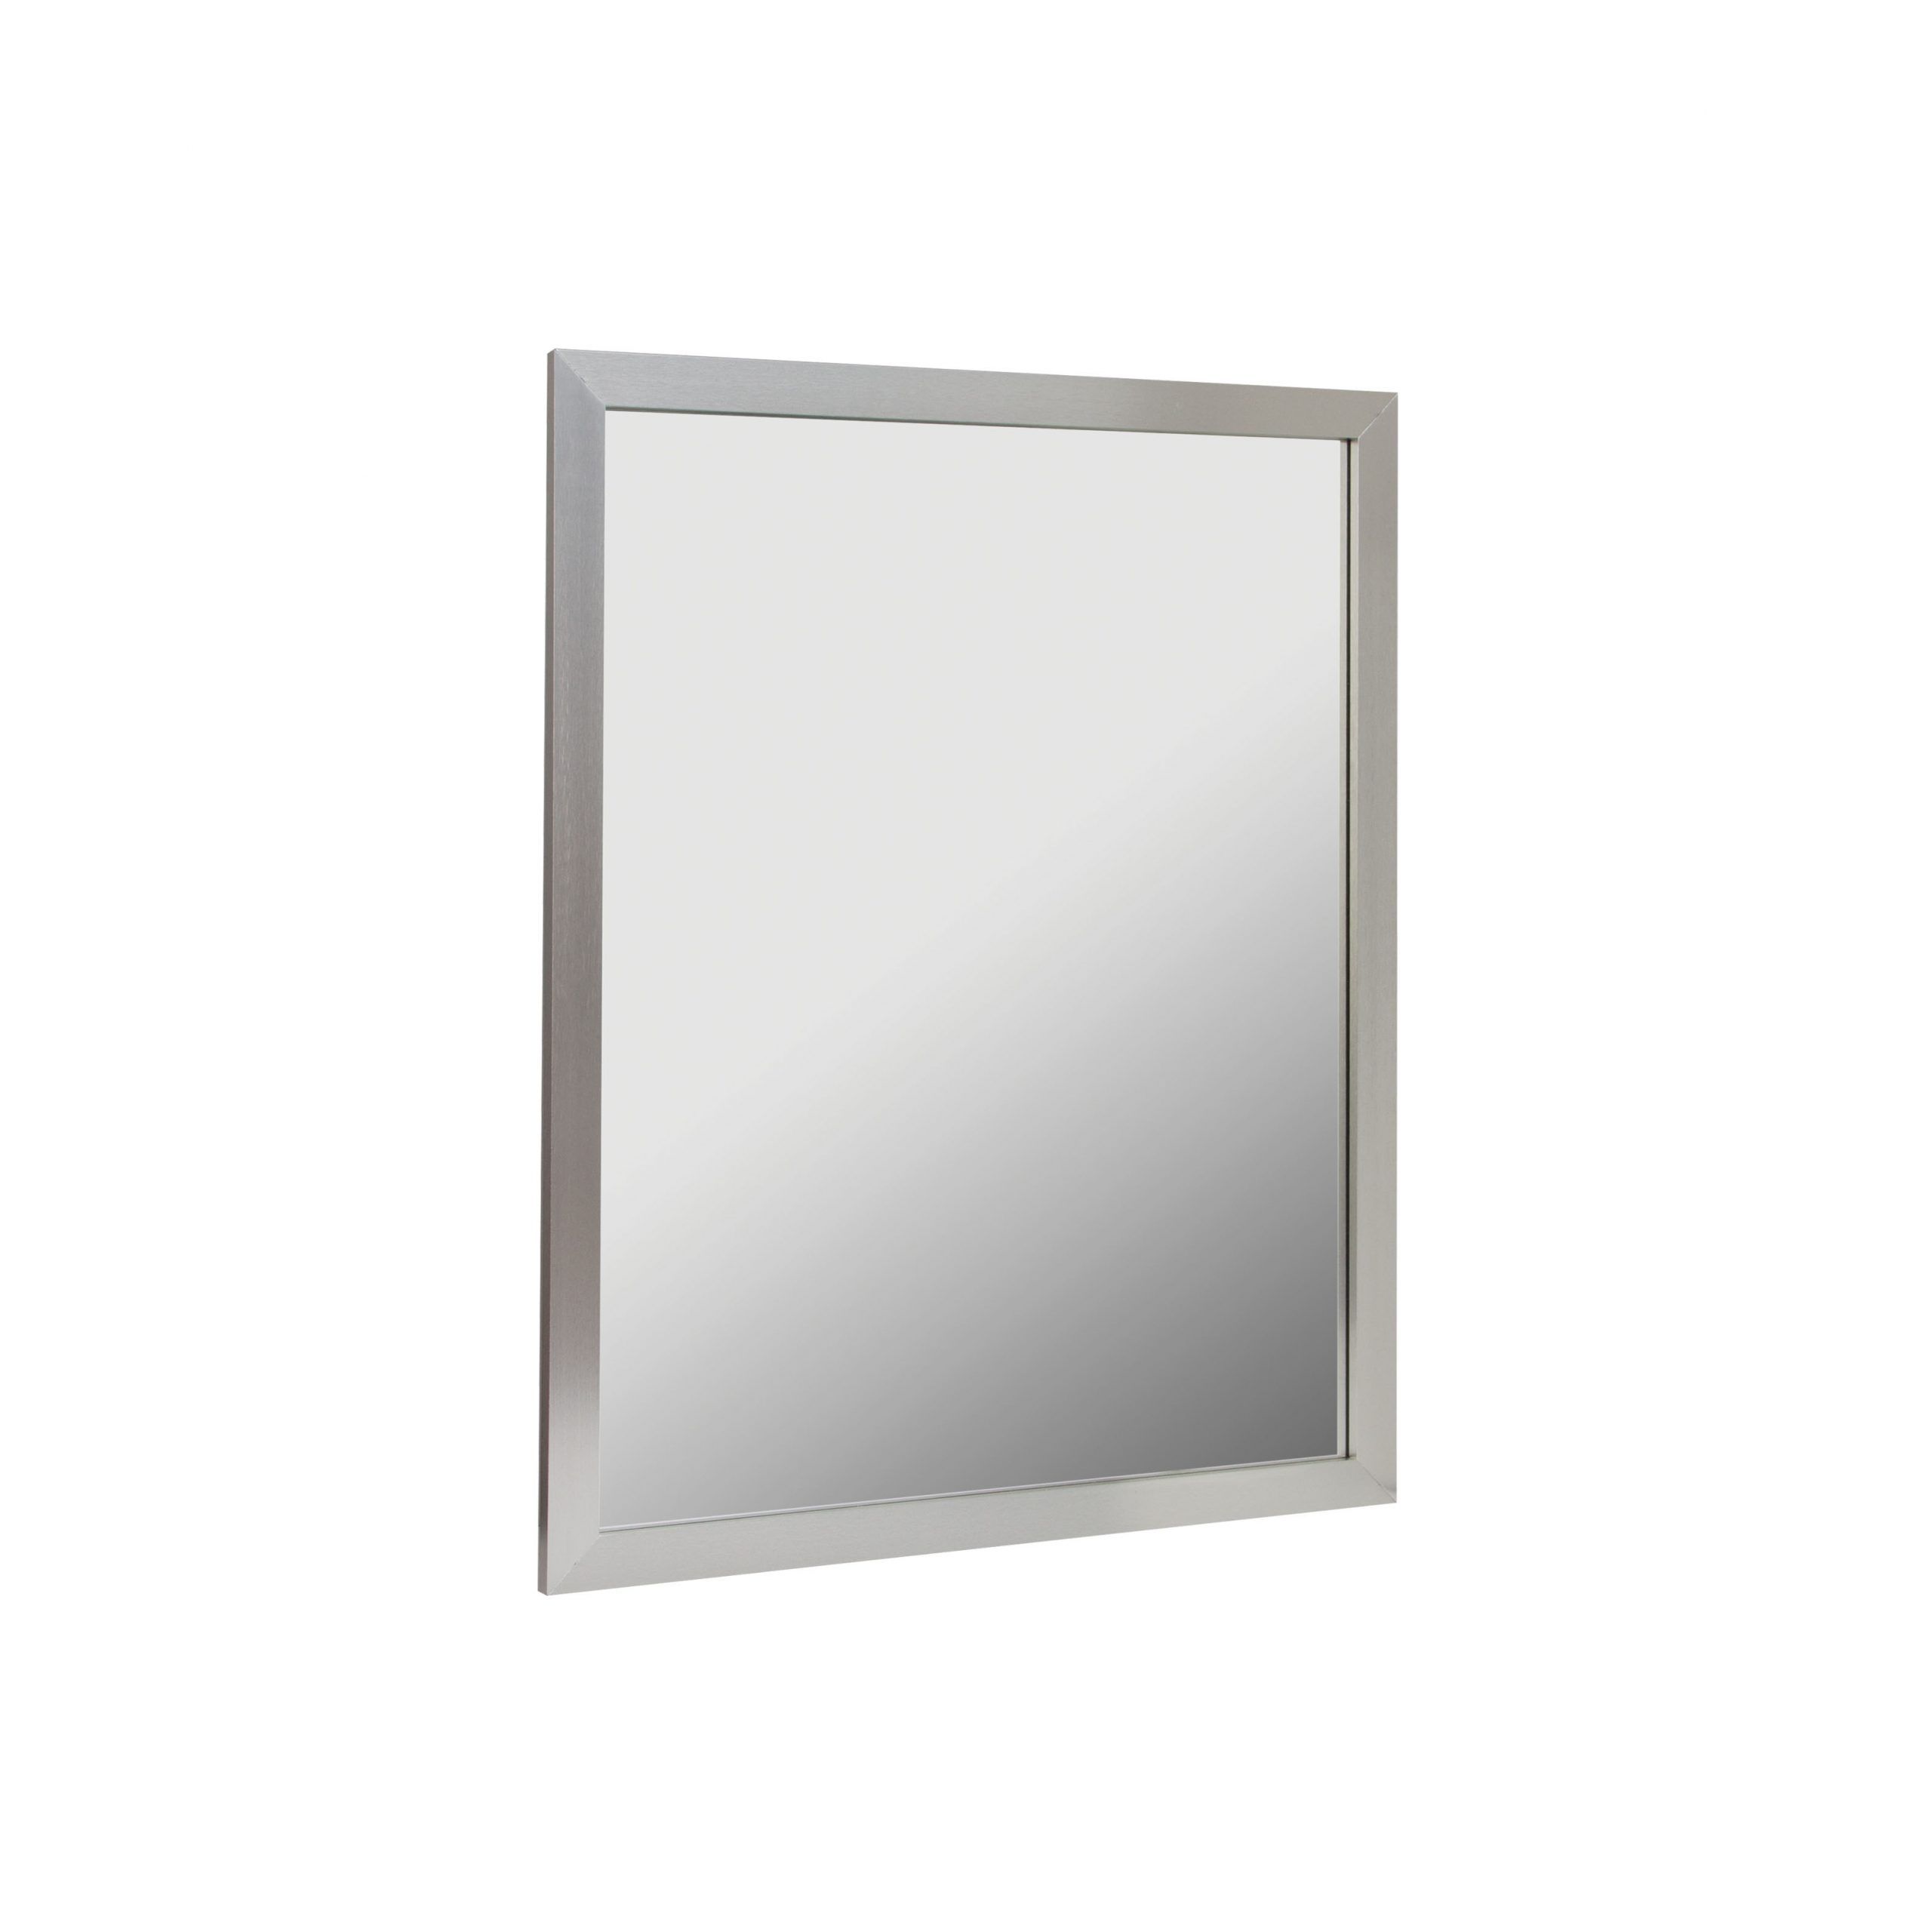 24x30 Aluminum Framed Mirror In Brushed Nickel – Foremost Bath Inside Oxidized Nickel Wall Mirrors (View 1 of 15)